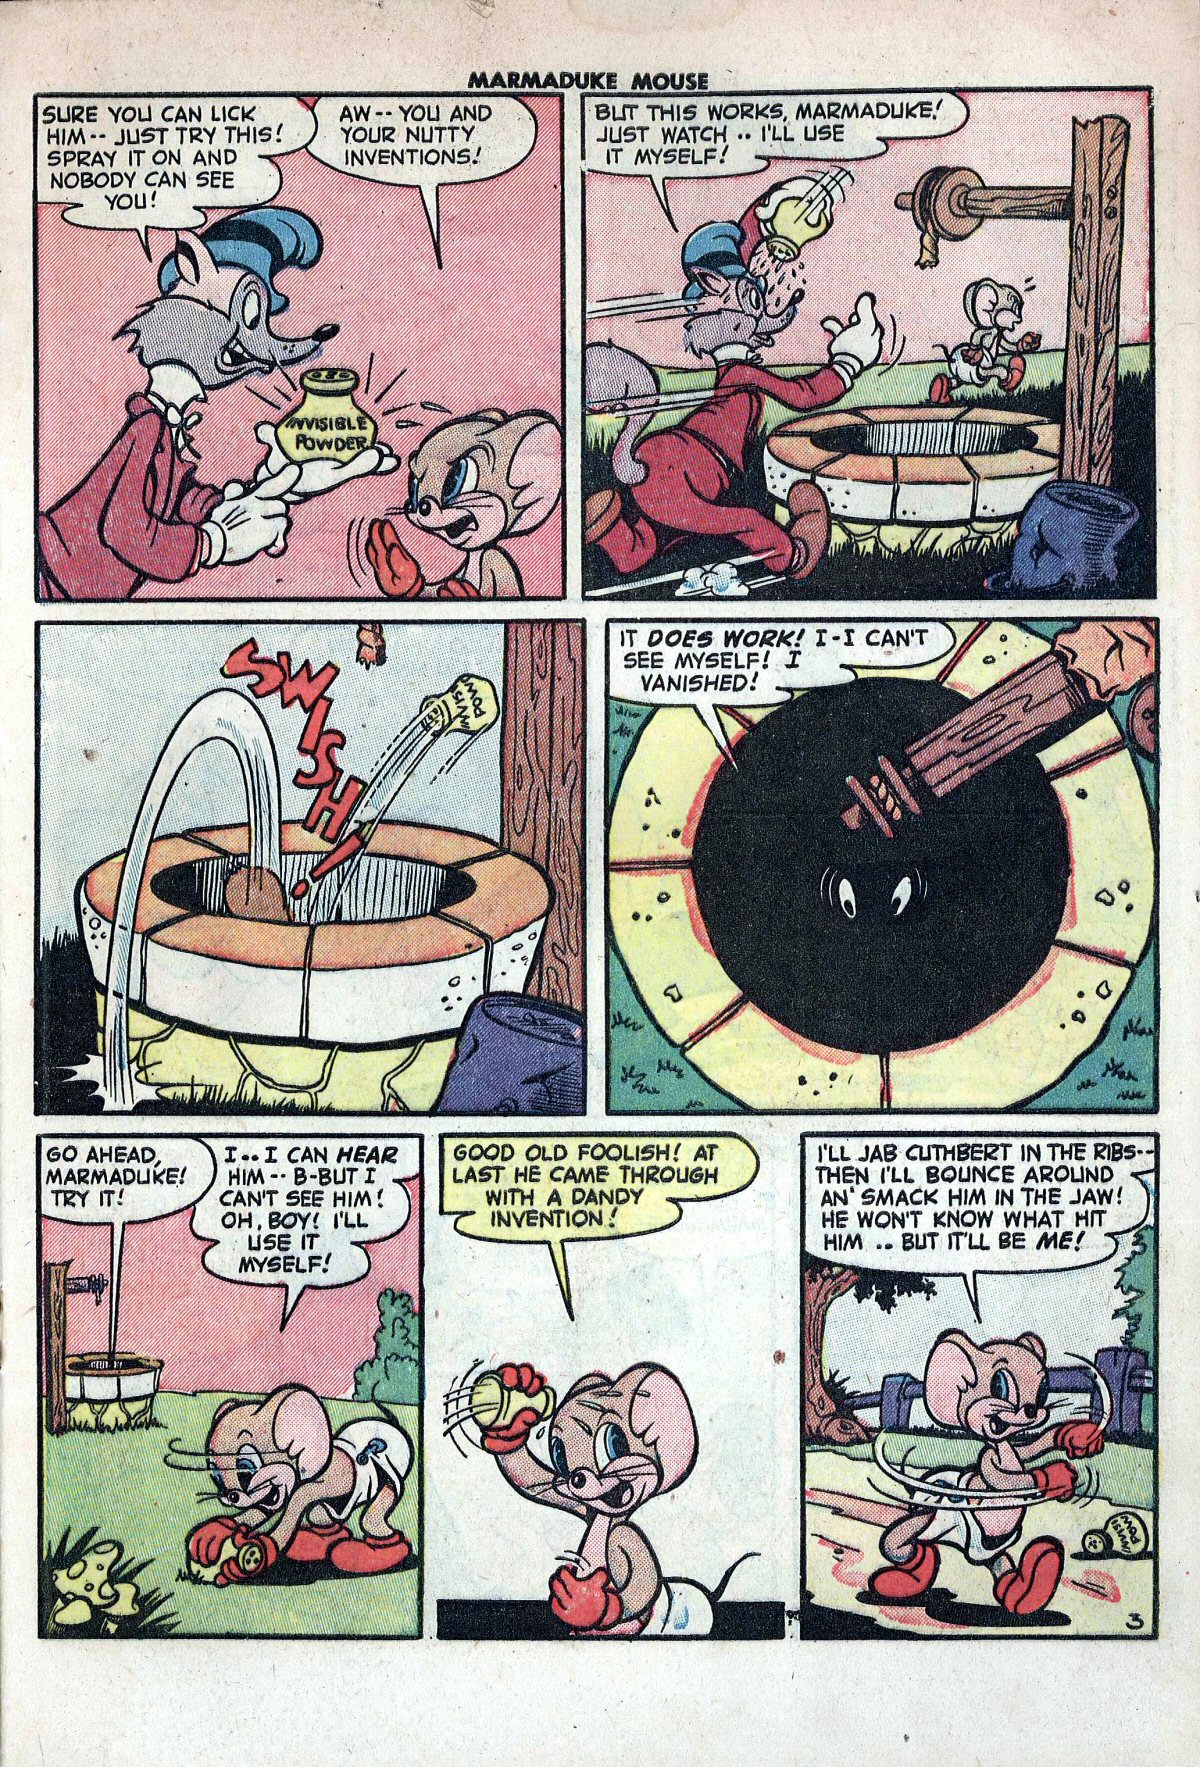 Read online Marmaduke Mouse comic -  Issue #39 - 5